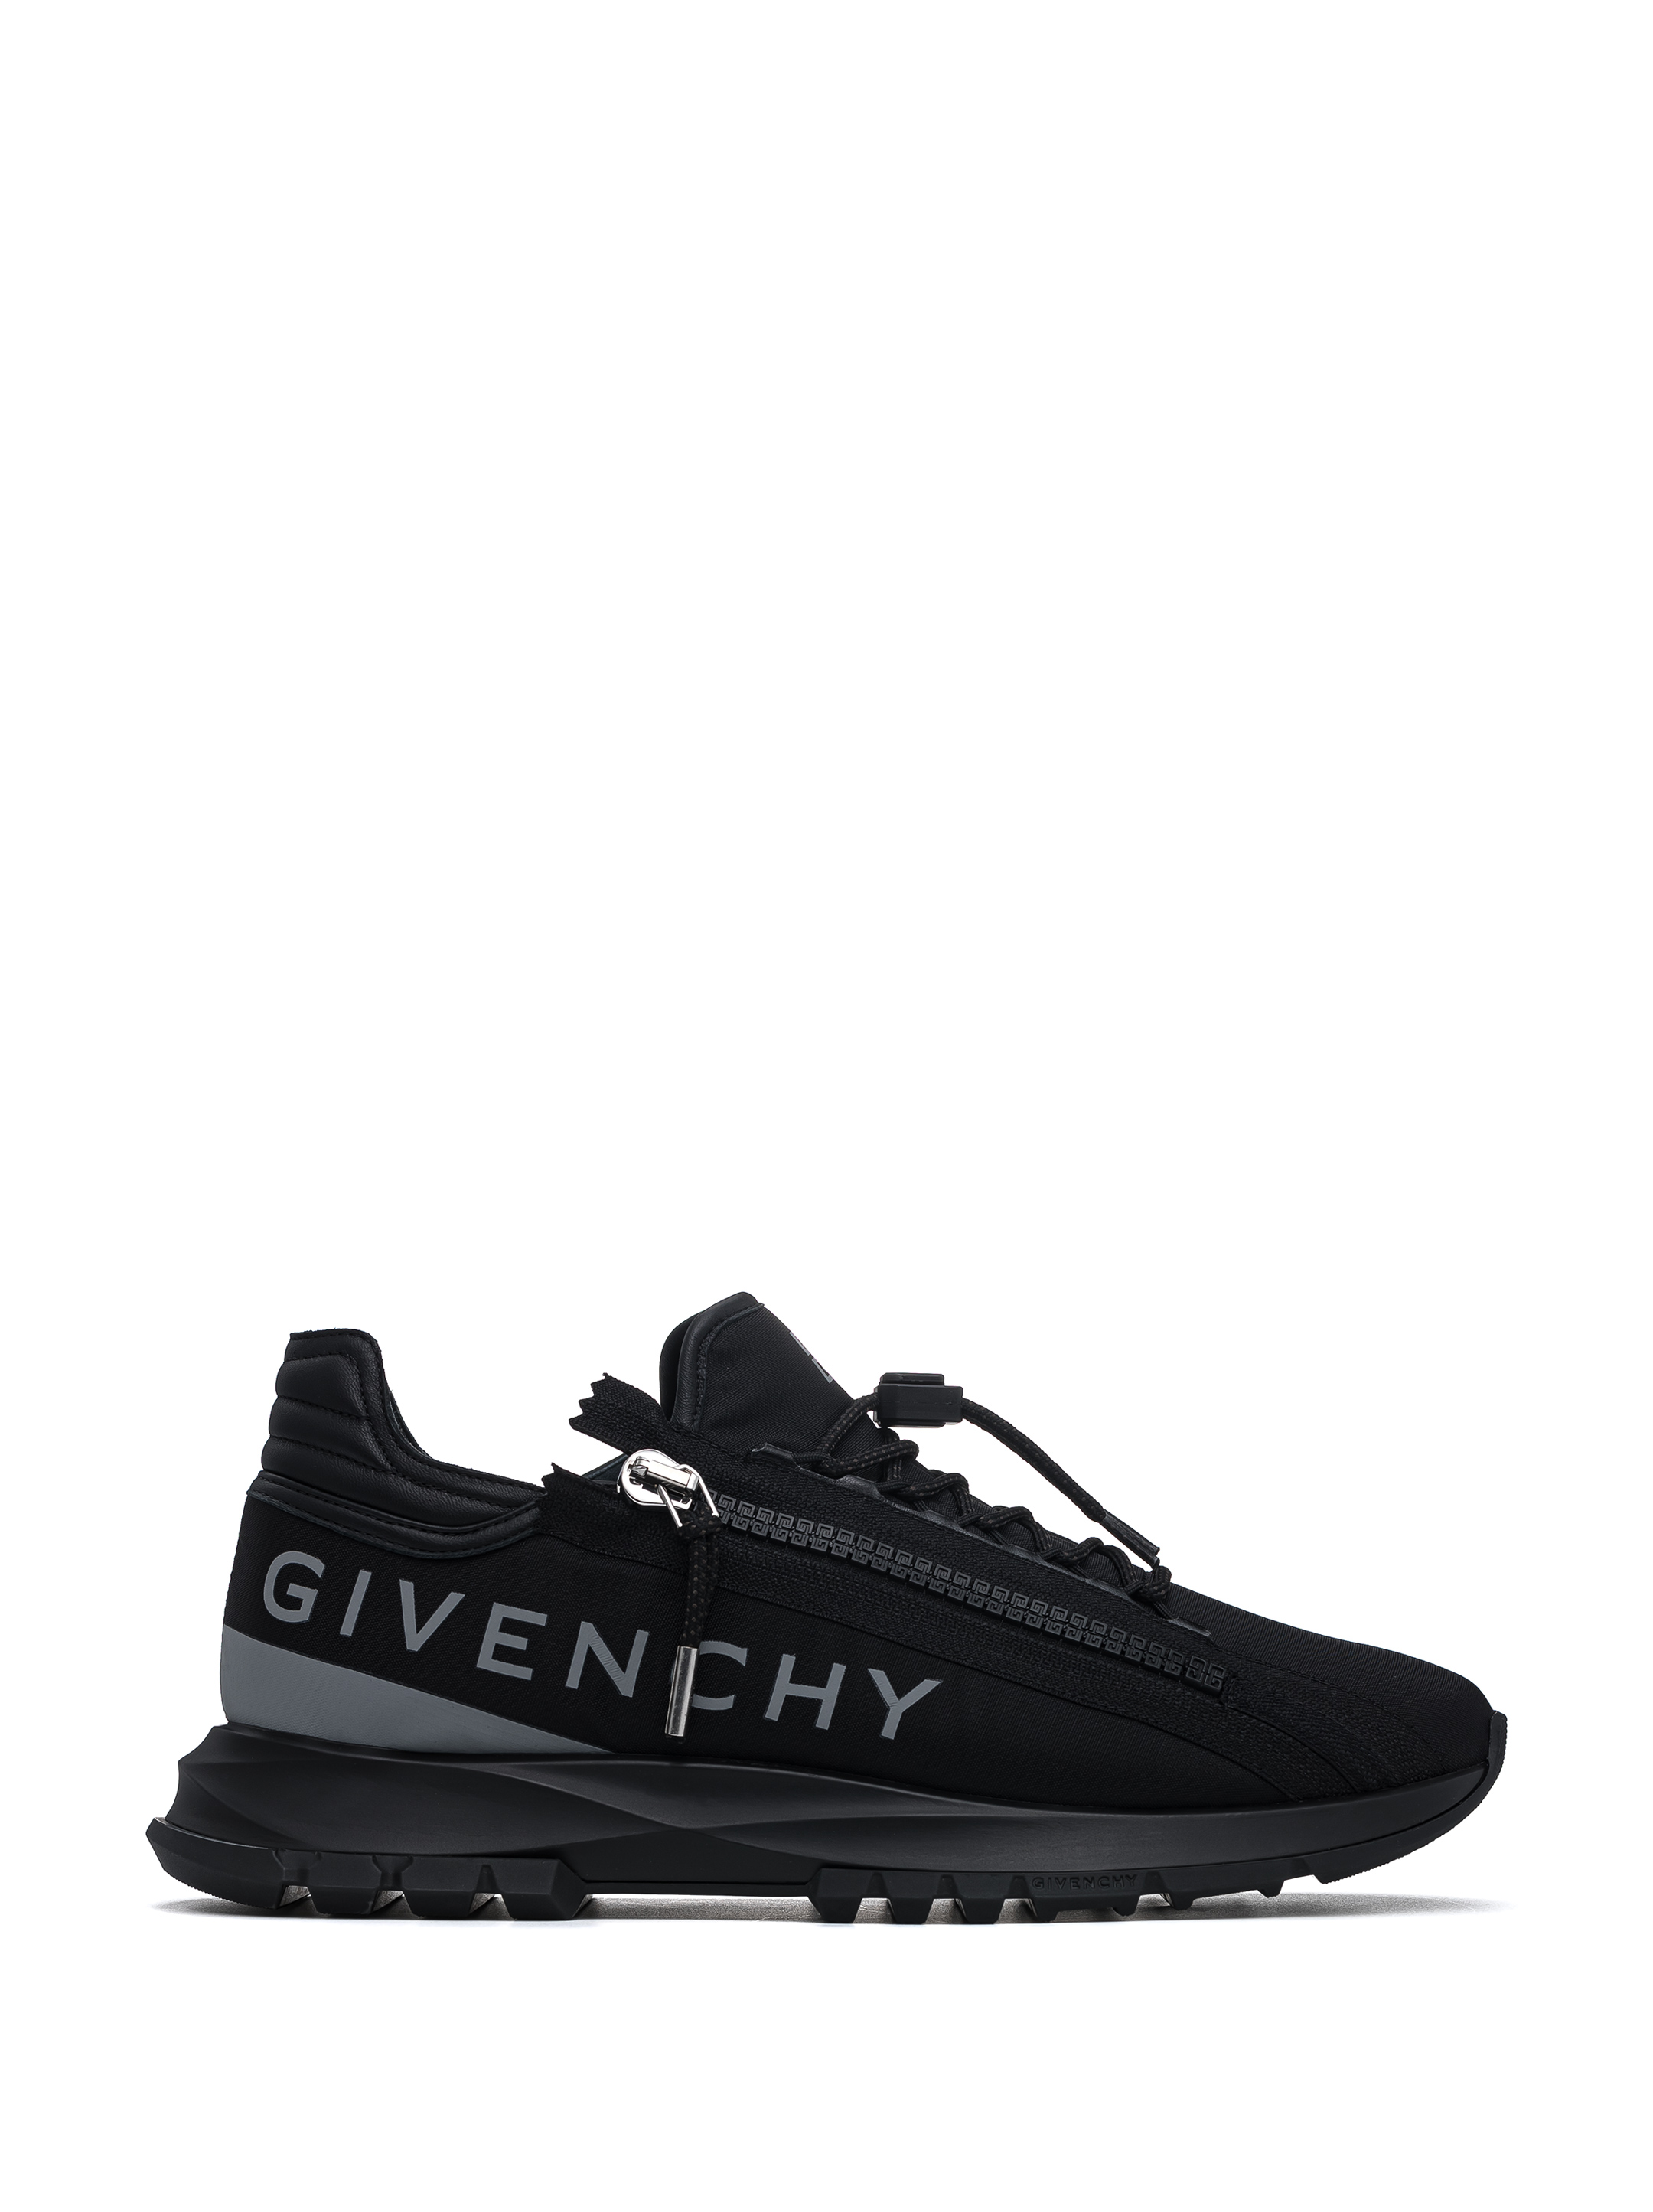 Givenchy GIV1 Leather & Mesh Trainers/Sneakers/Shoes. 10US/9UK/43EU for  sale online | eBay